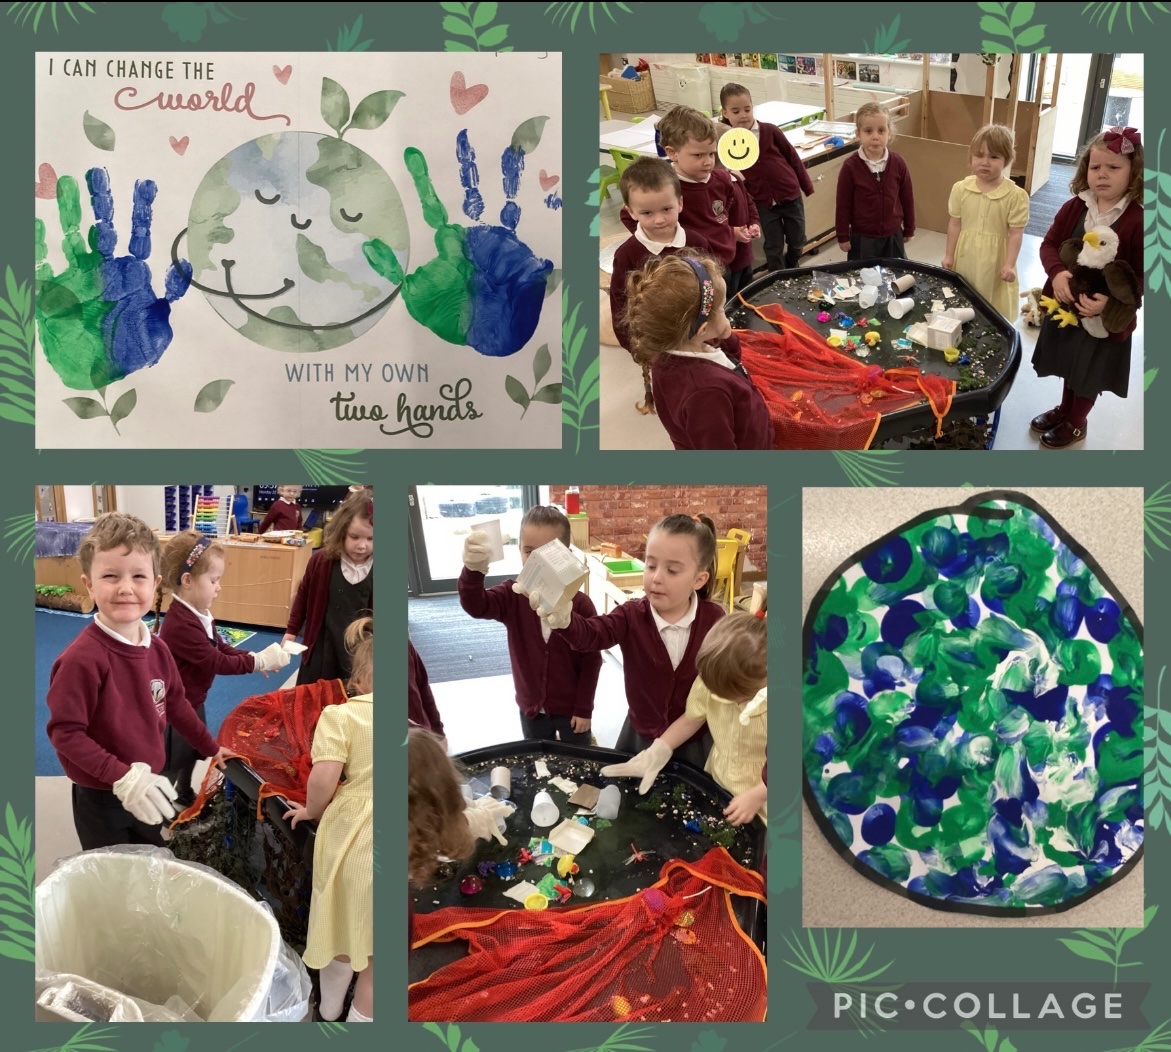 Dosbarth Willow enjoyed celebrating 'Earth Day'. We created our own Earth playdough and wonderful paintings of our planet. The class were so upset to find litter in our rock pool, they wanted to clean it up safely with Emlyn's help!